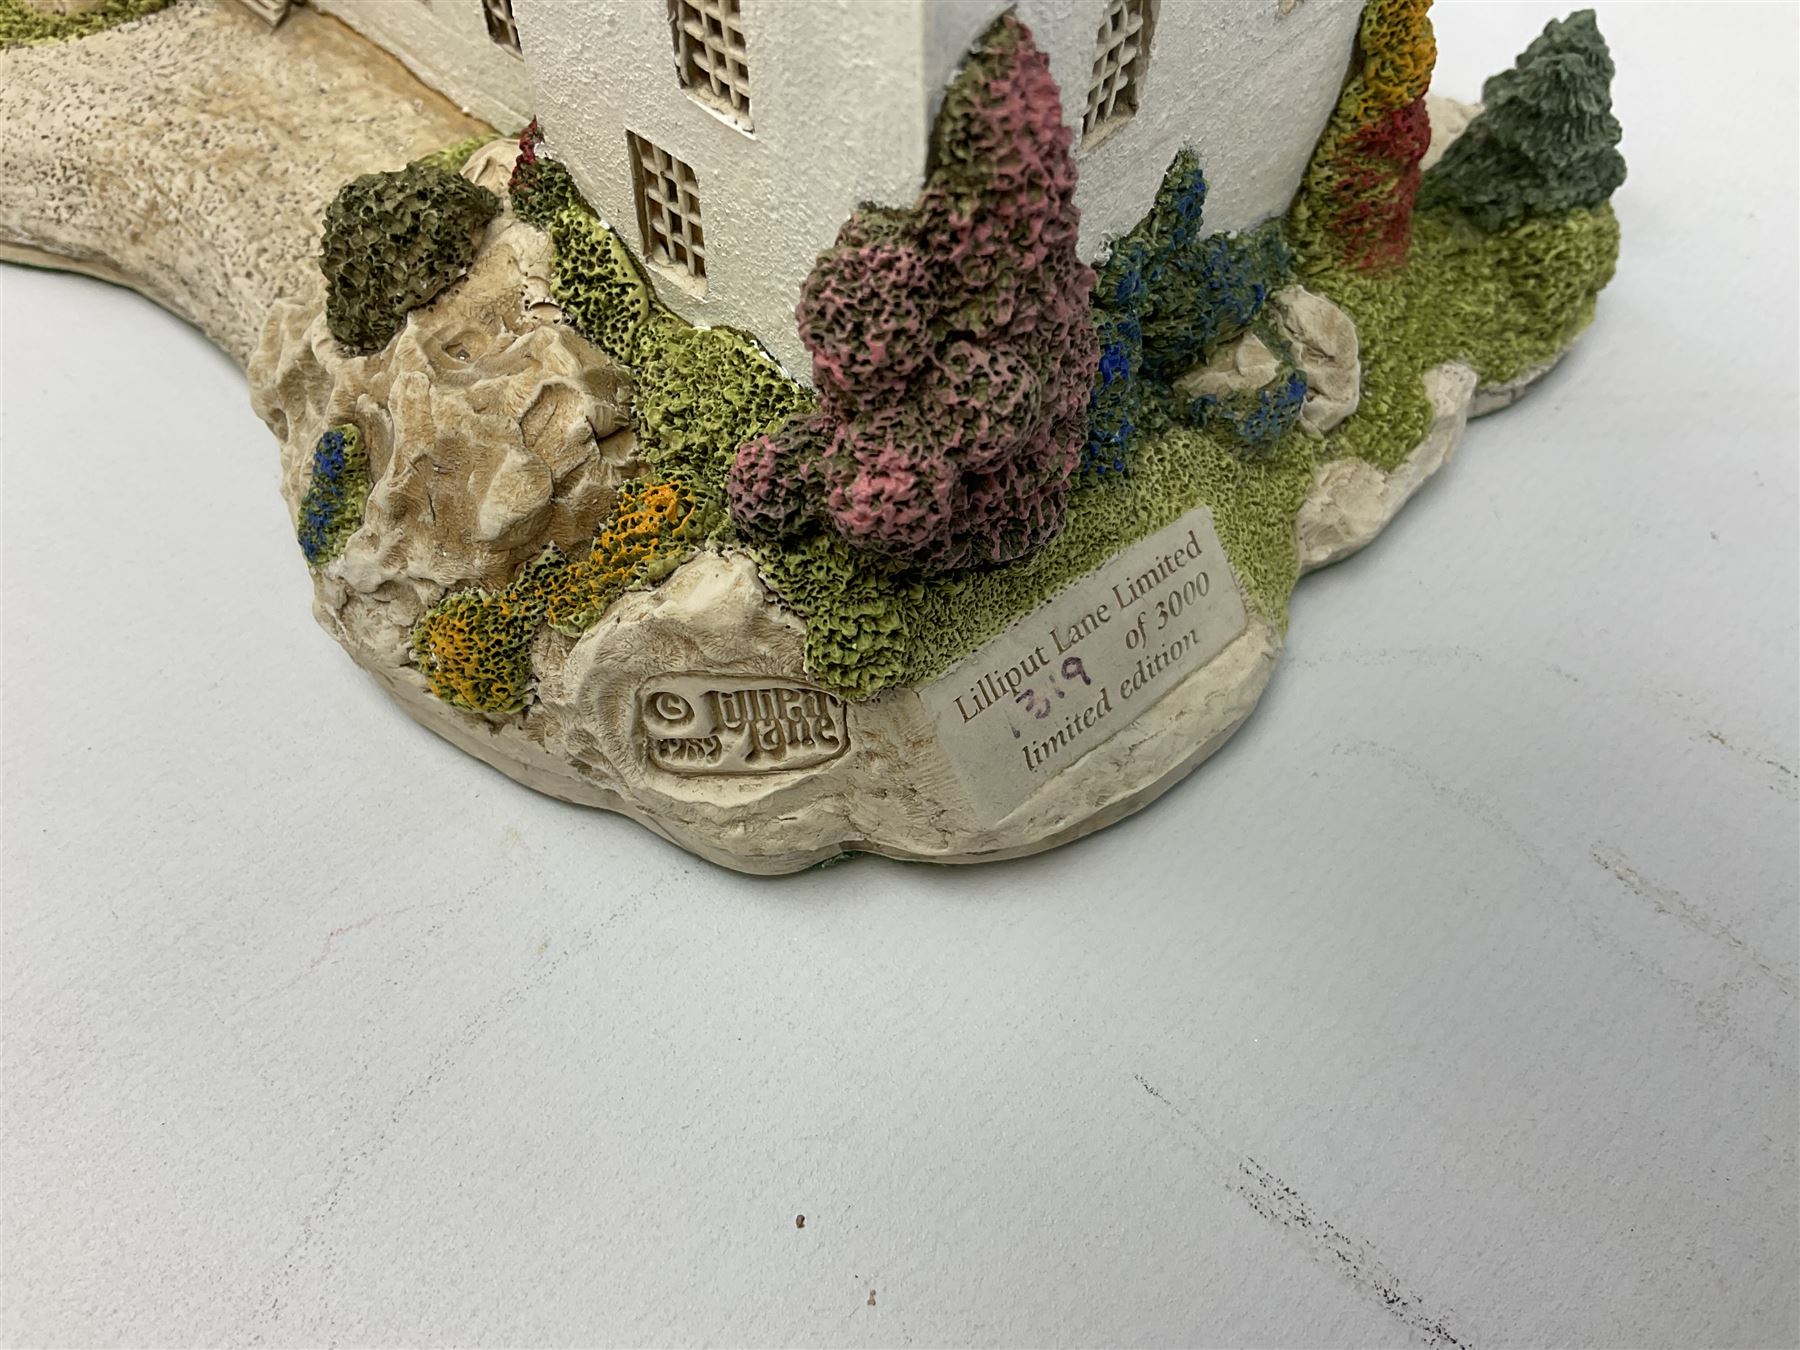 Two limited edition Lilliput Lane cottages - Image 4 of 9